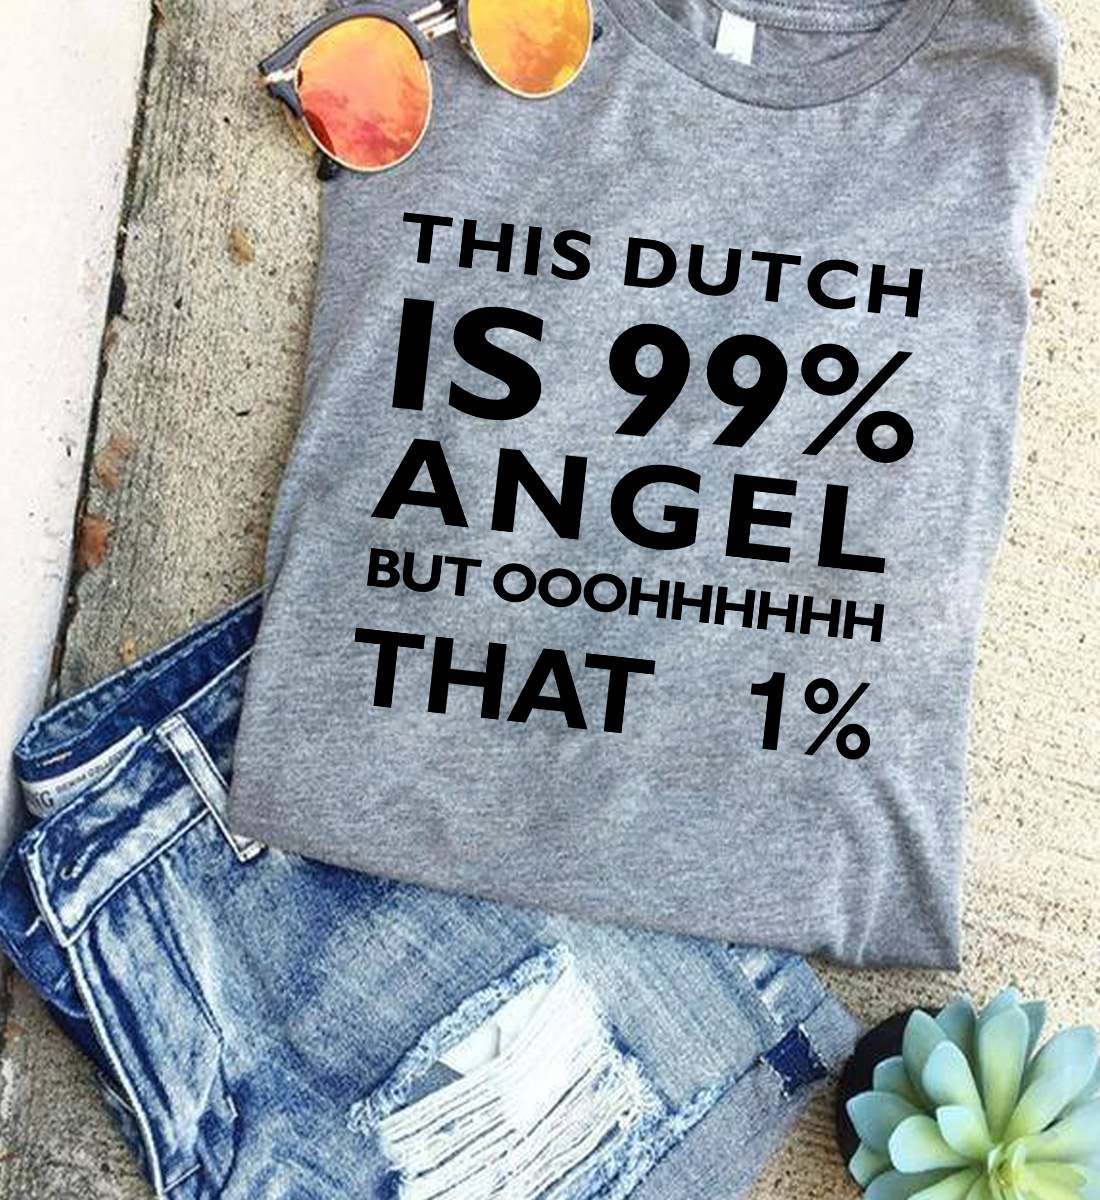 This Dutch is 99% angel but ooohhhhh that 1% - Dutch people